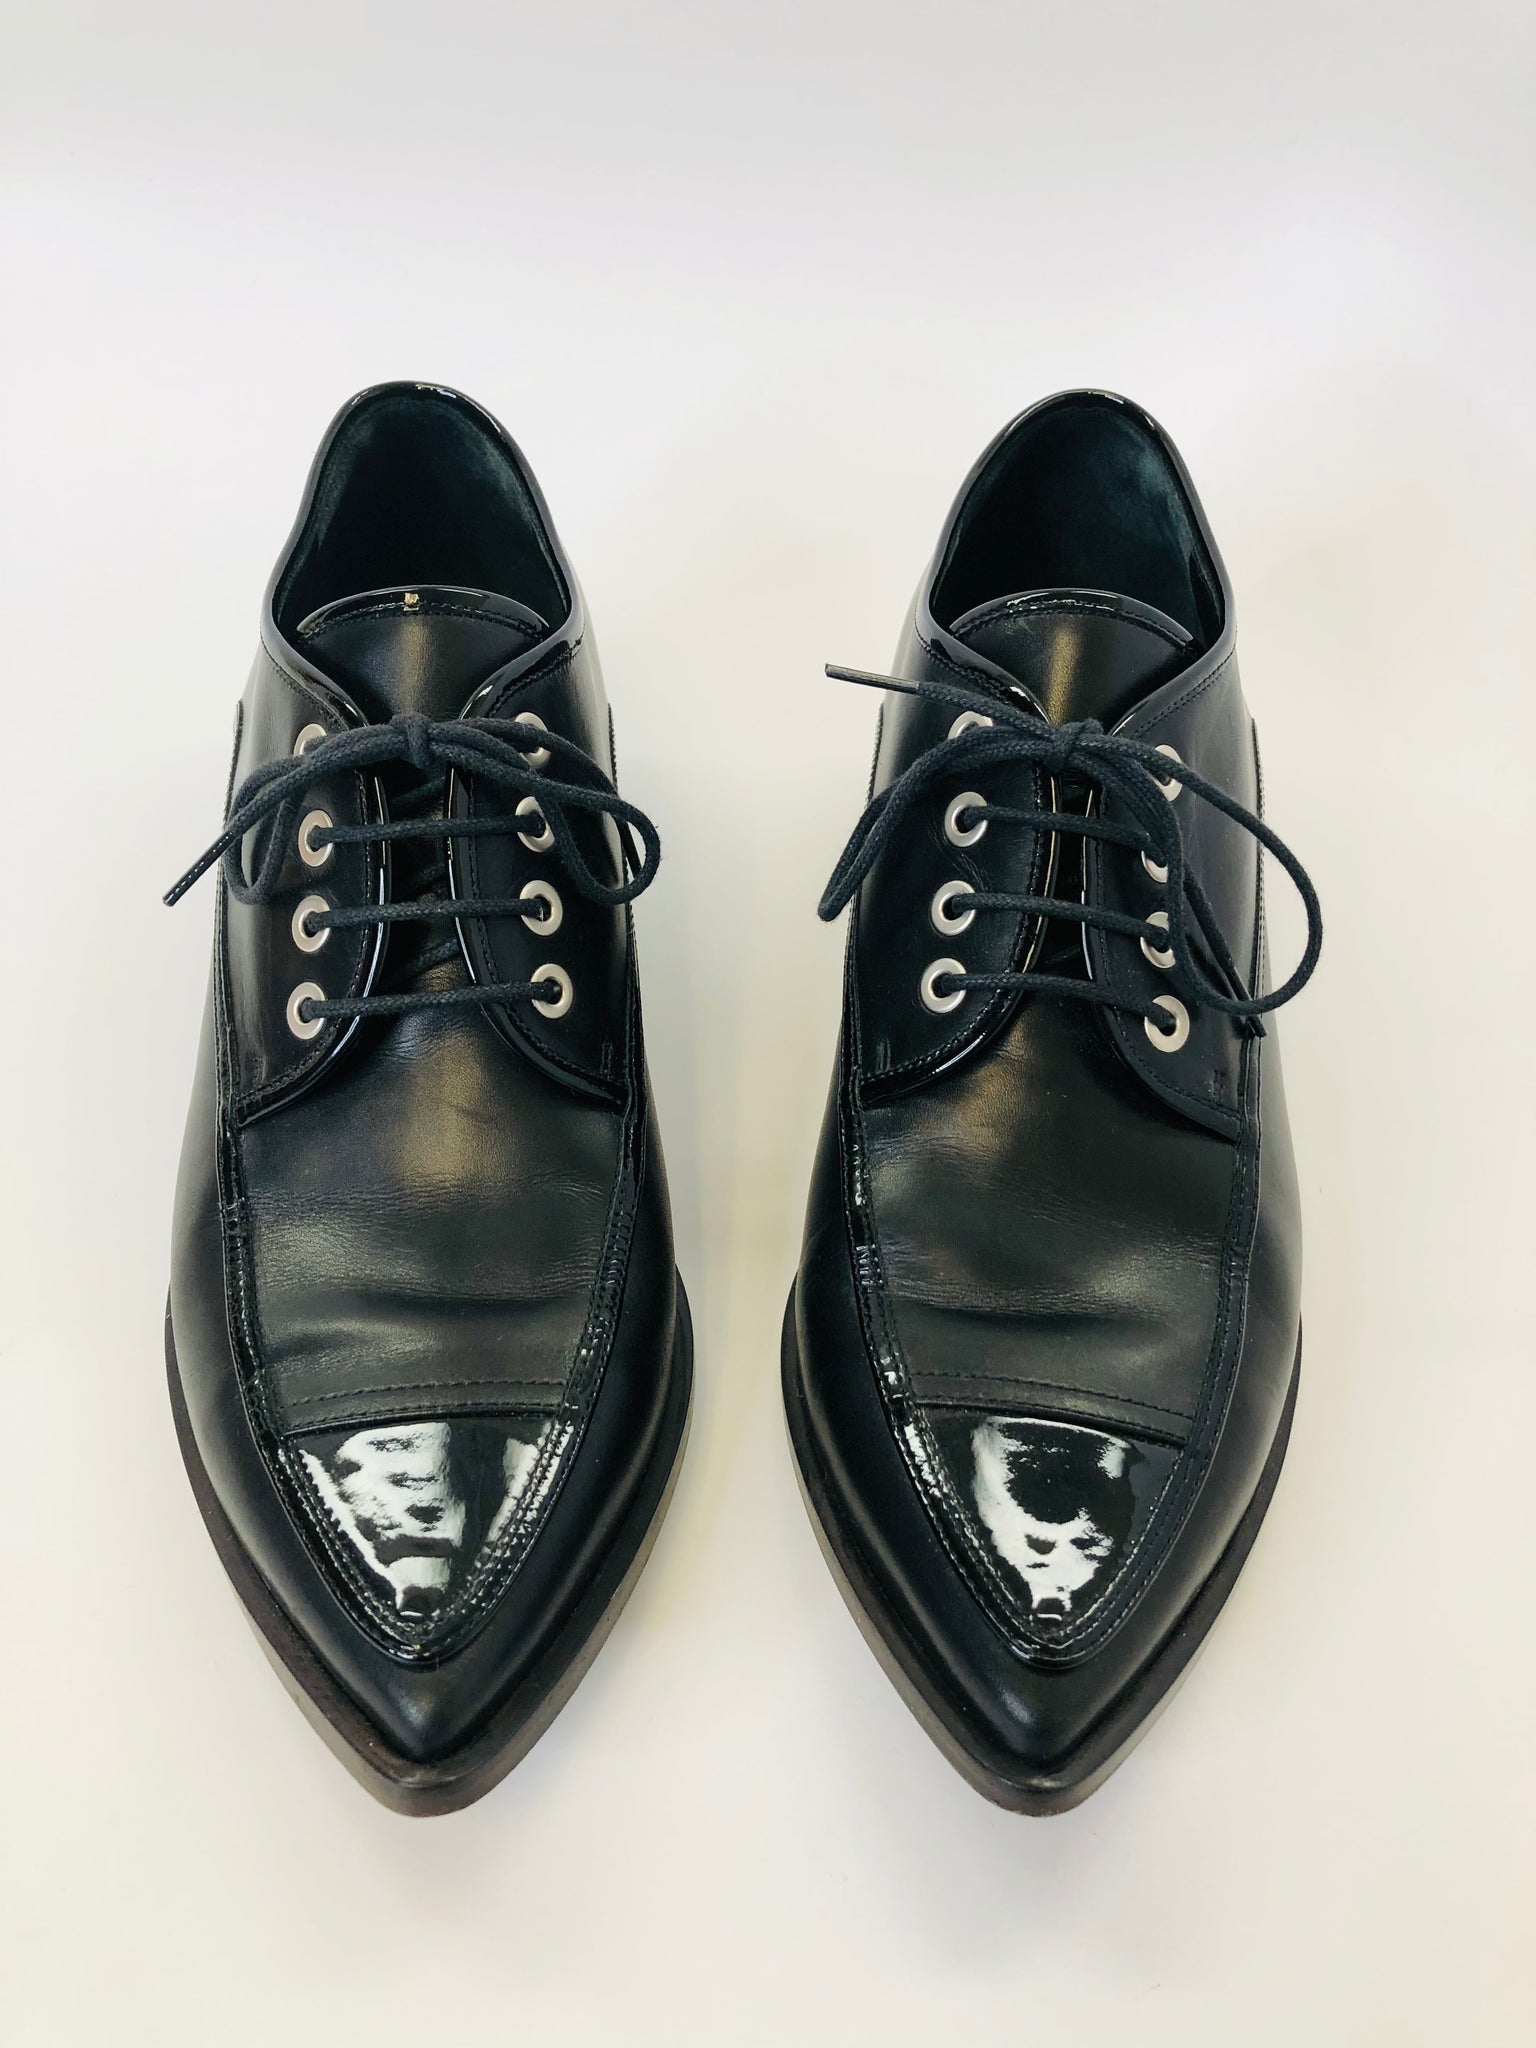 CHANEL Black Leather Lace Up Shoes Size 40 – JDEX Styles